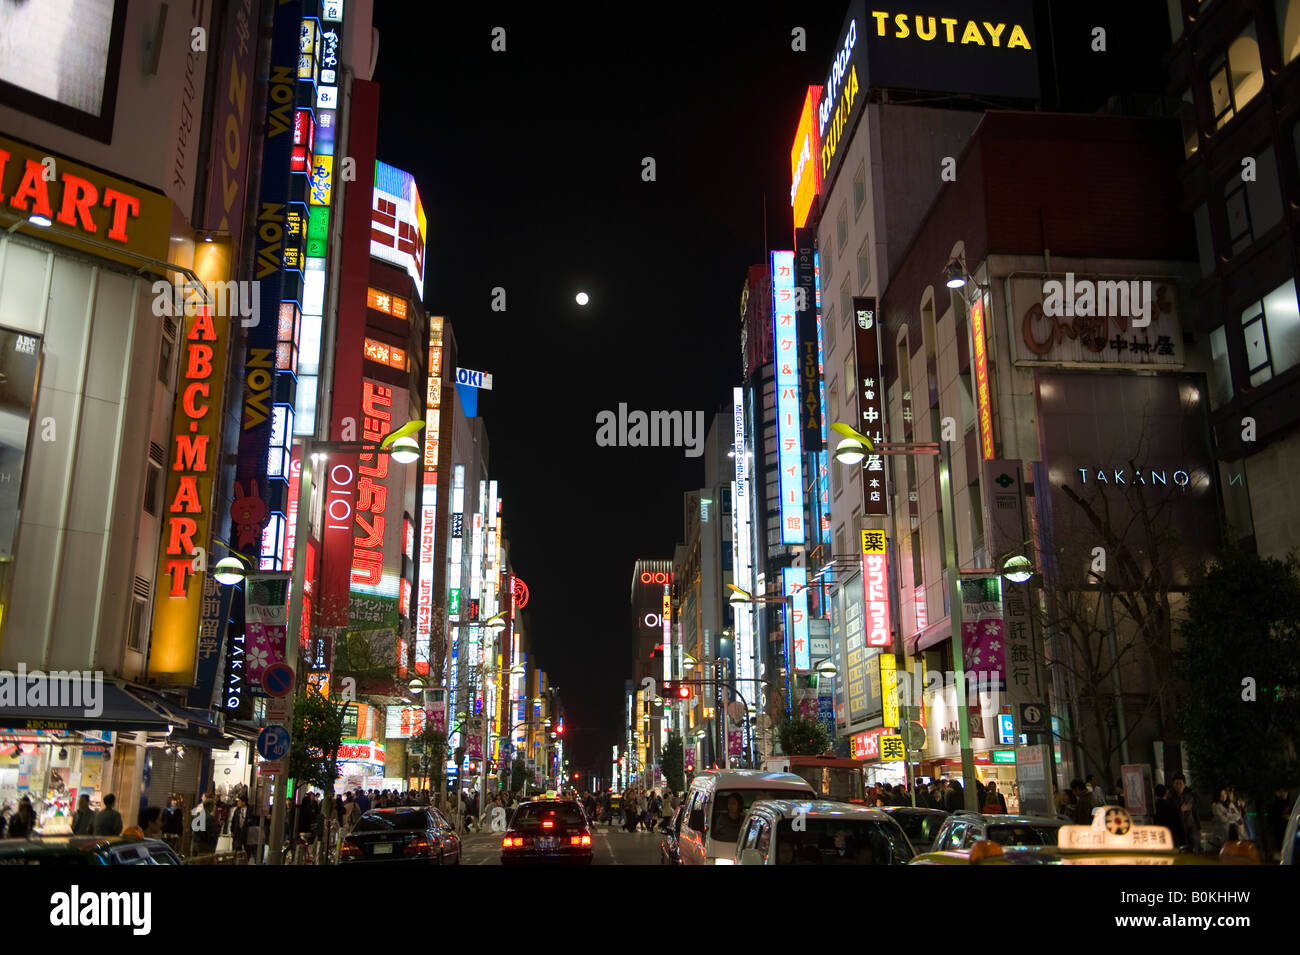 Tokyo, Japan. Neon lights in Shinjuku, with a full moon. The opening sequence of the movie 'Lost in Translation' was set here. Stock Photo